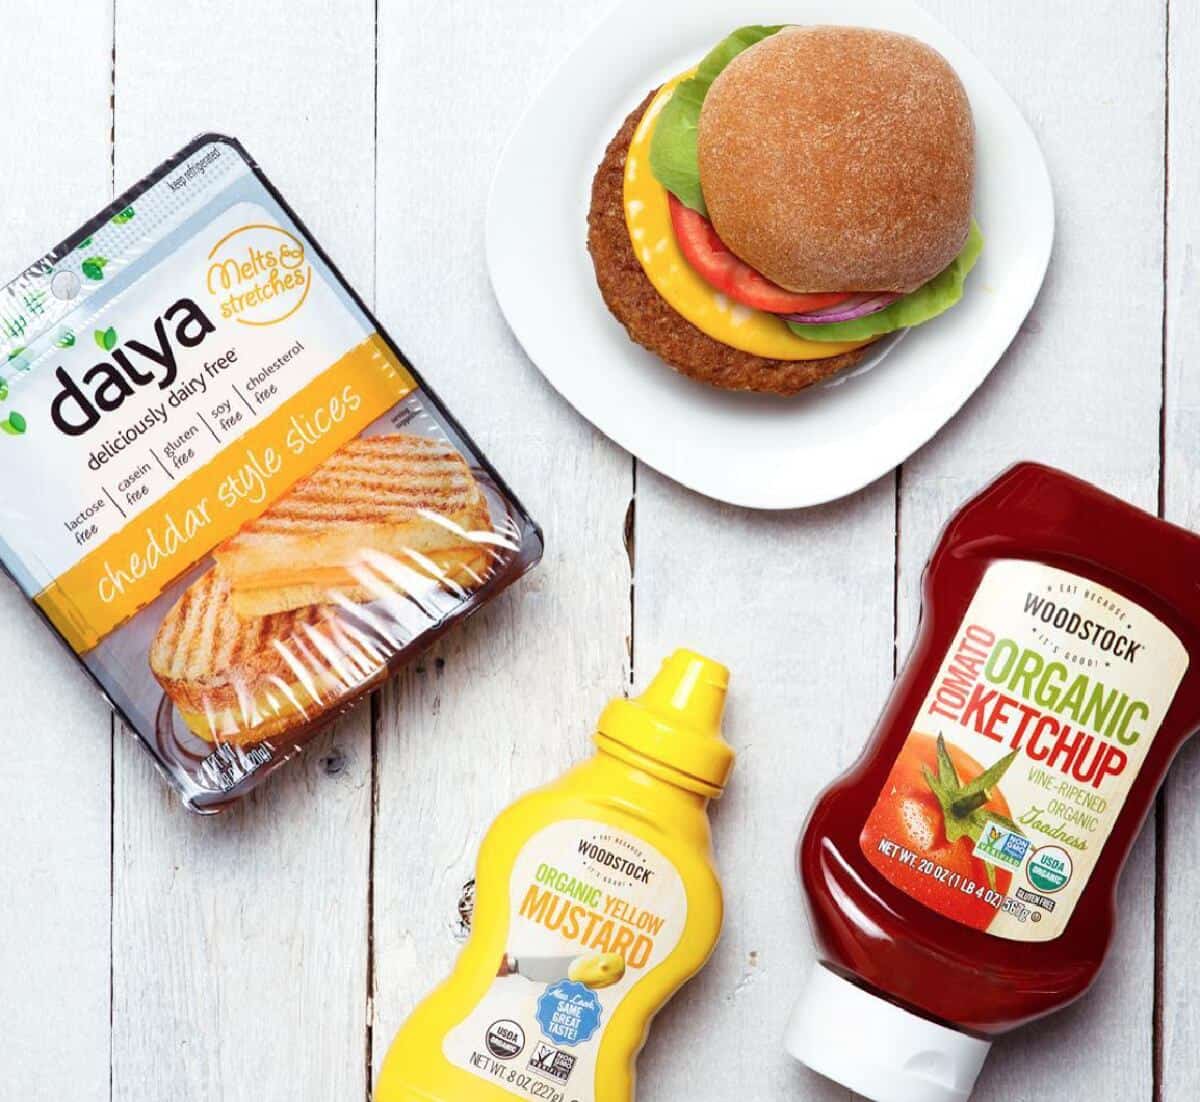 A package of Daiya vegan cheese slices, a bottle of ketchup, mustard, and a veggie burger on a plate against a white wooden background. 